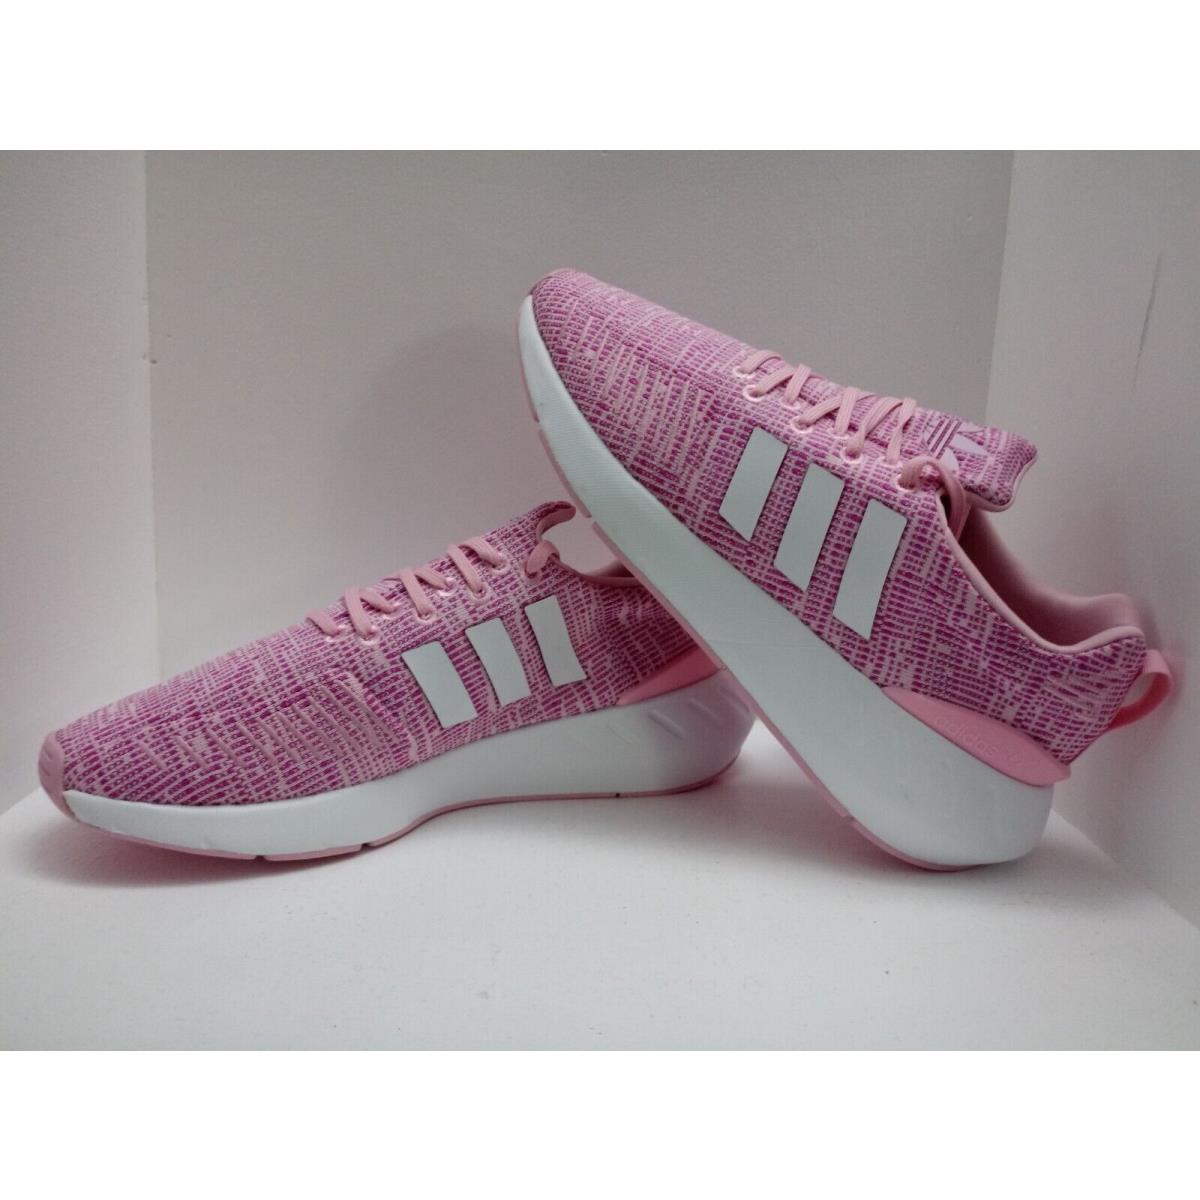 Adidas shoes  - PINK/WHITE 7